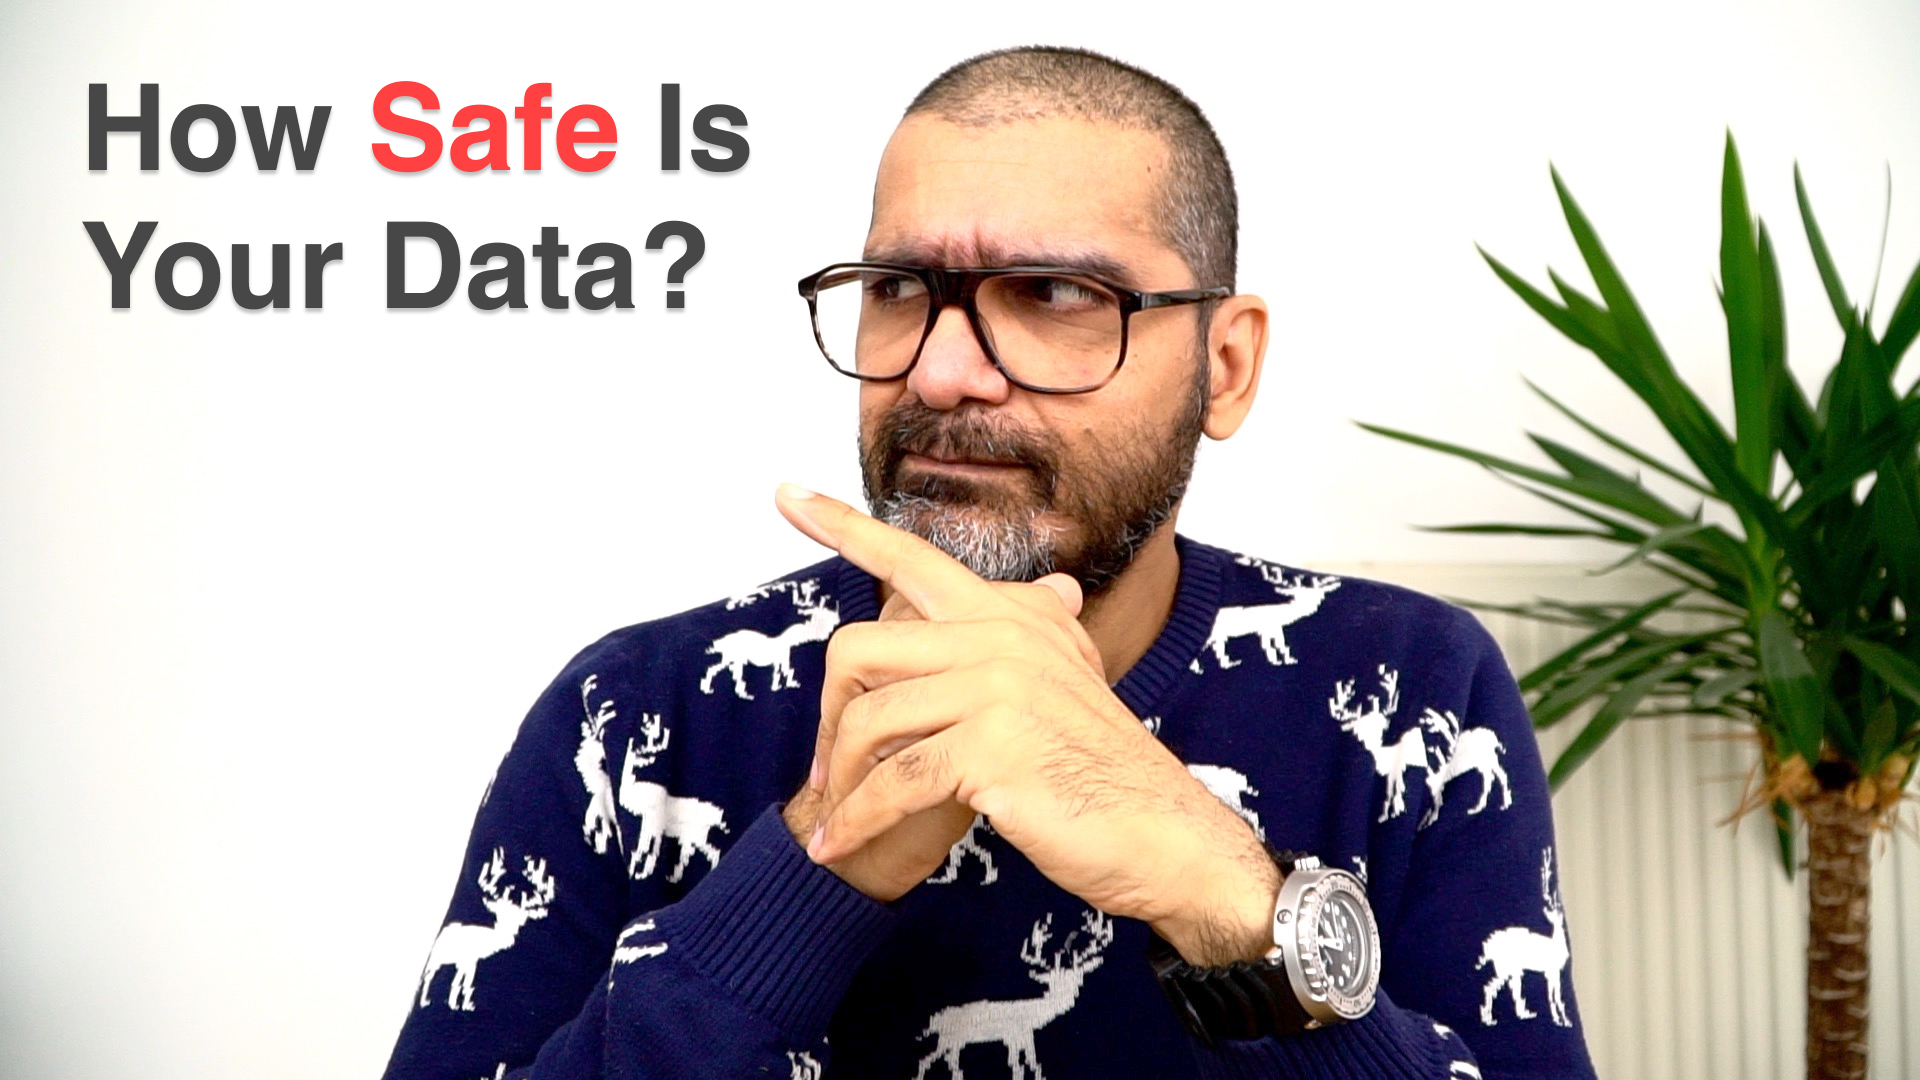 So how safe is your data?